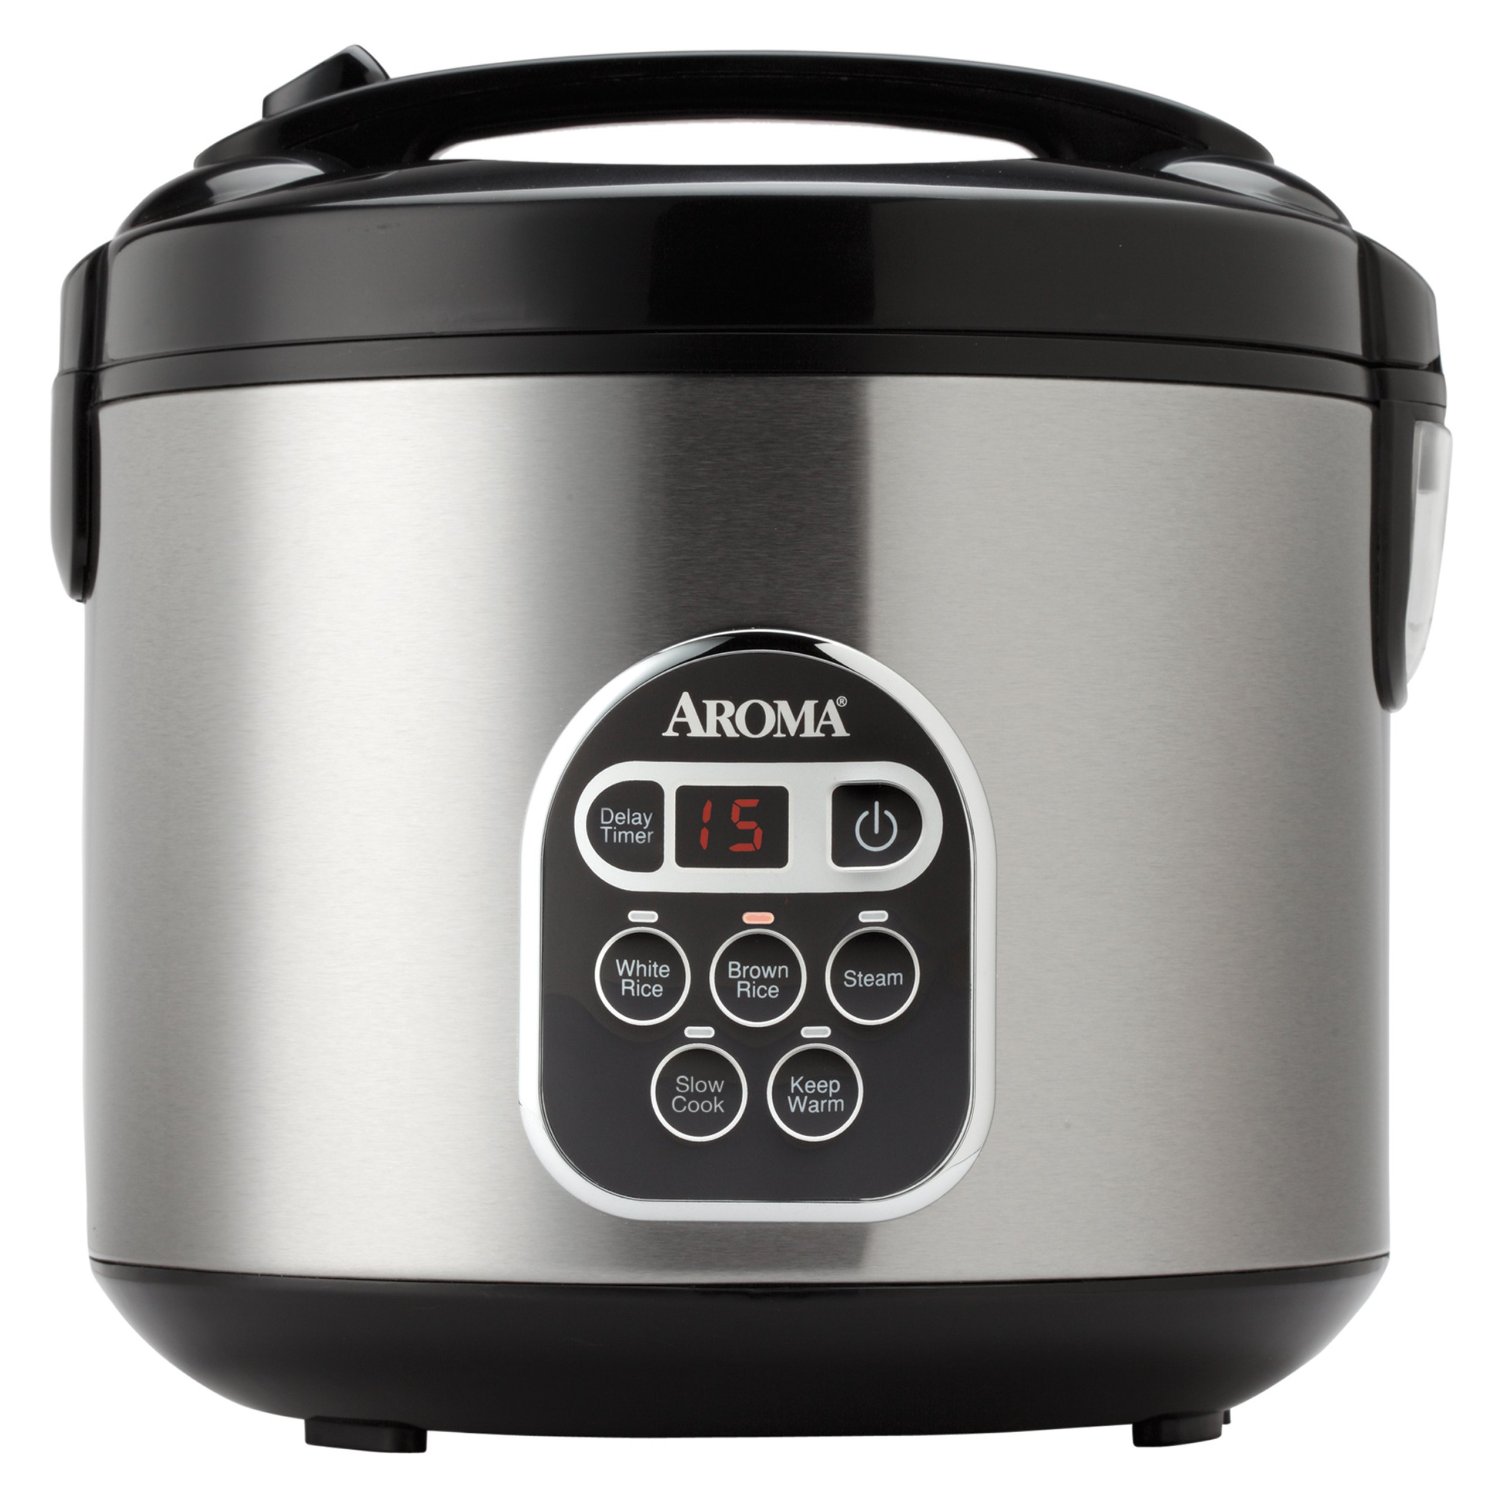 Aroma Rice Cooker Model Arc-914sbd Manual